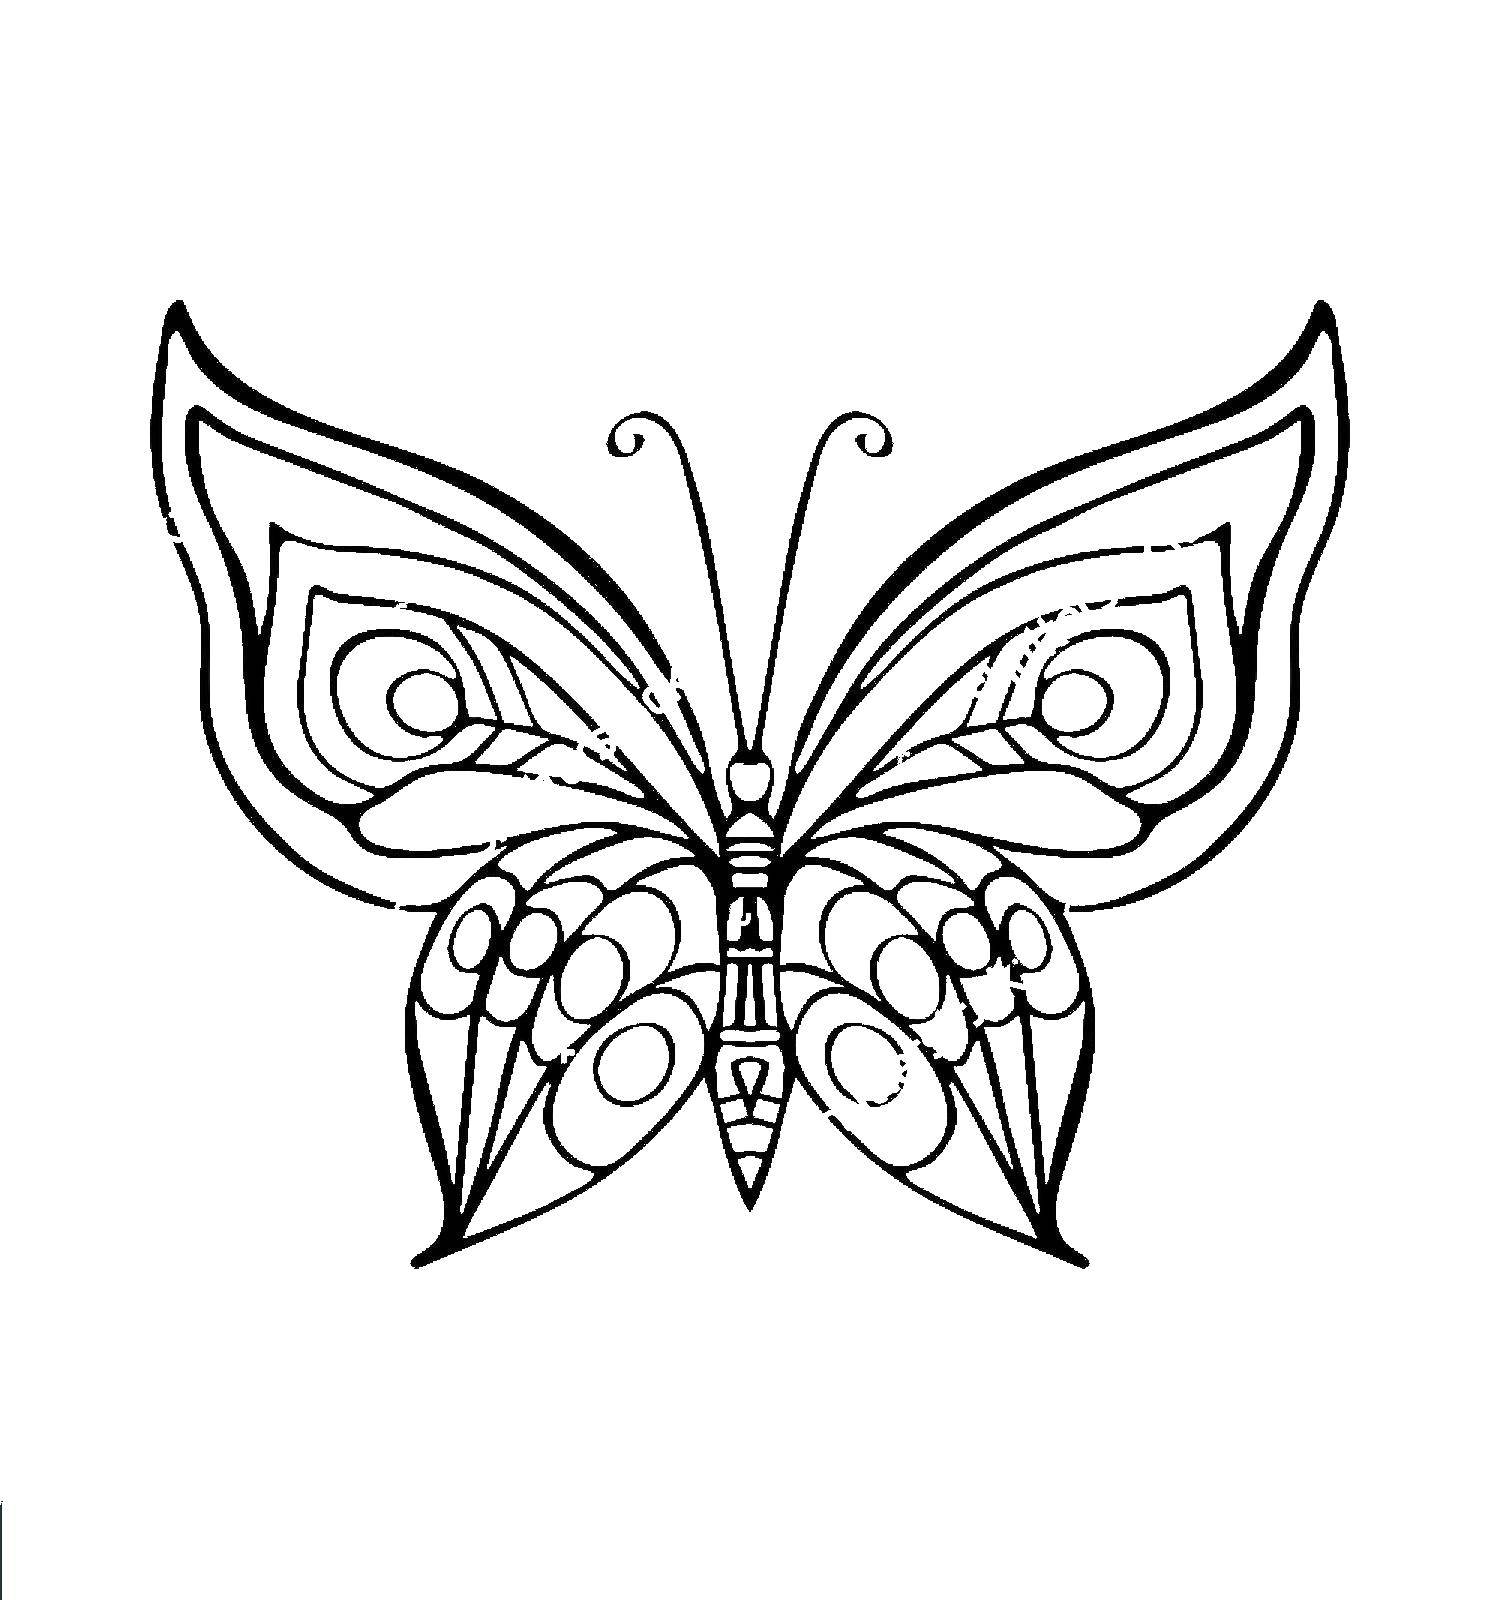 Coloring Butterfly. Category the contours of the butterflies to cut. Tags:  Butterfly.